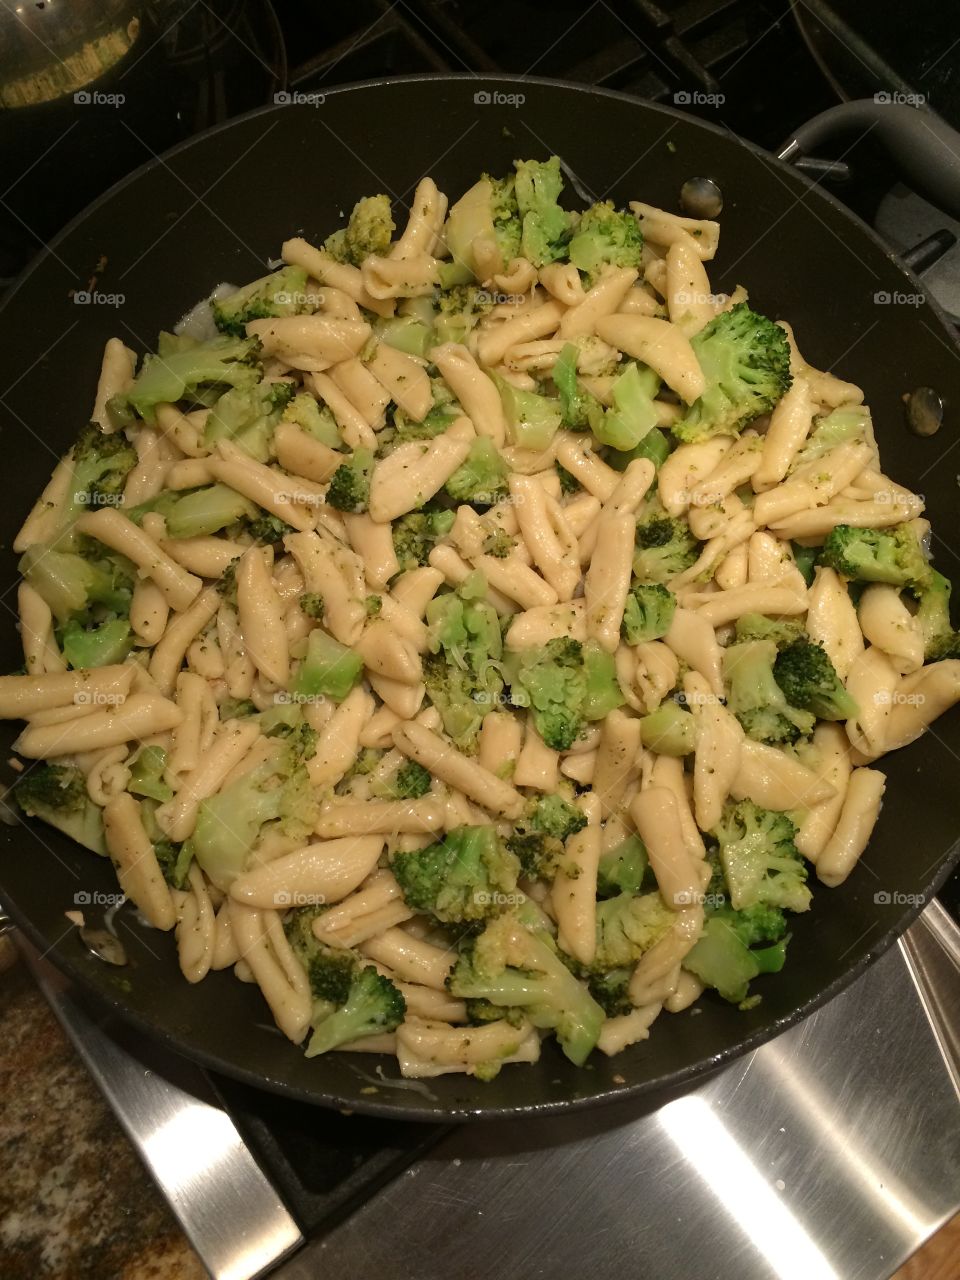 Broccoli and Cavatelli Yum!. One of my go to quick and easy dinner solutions. 